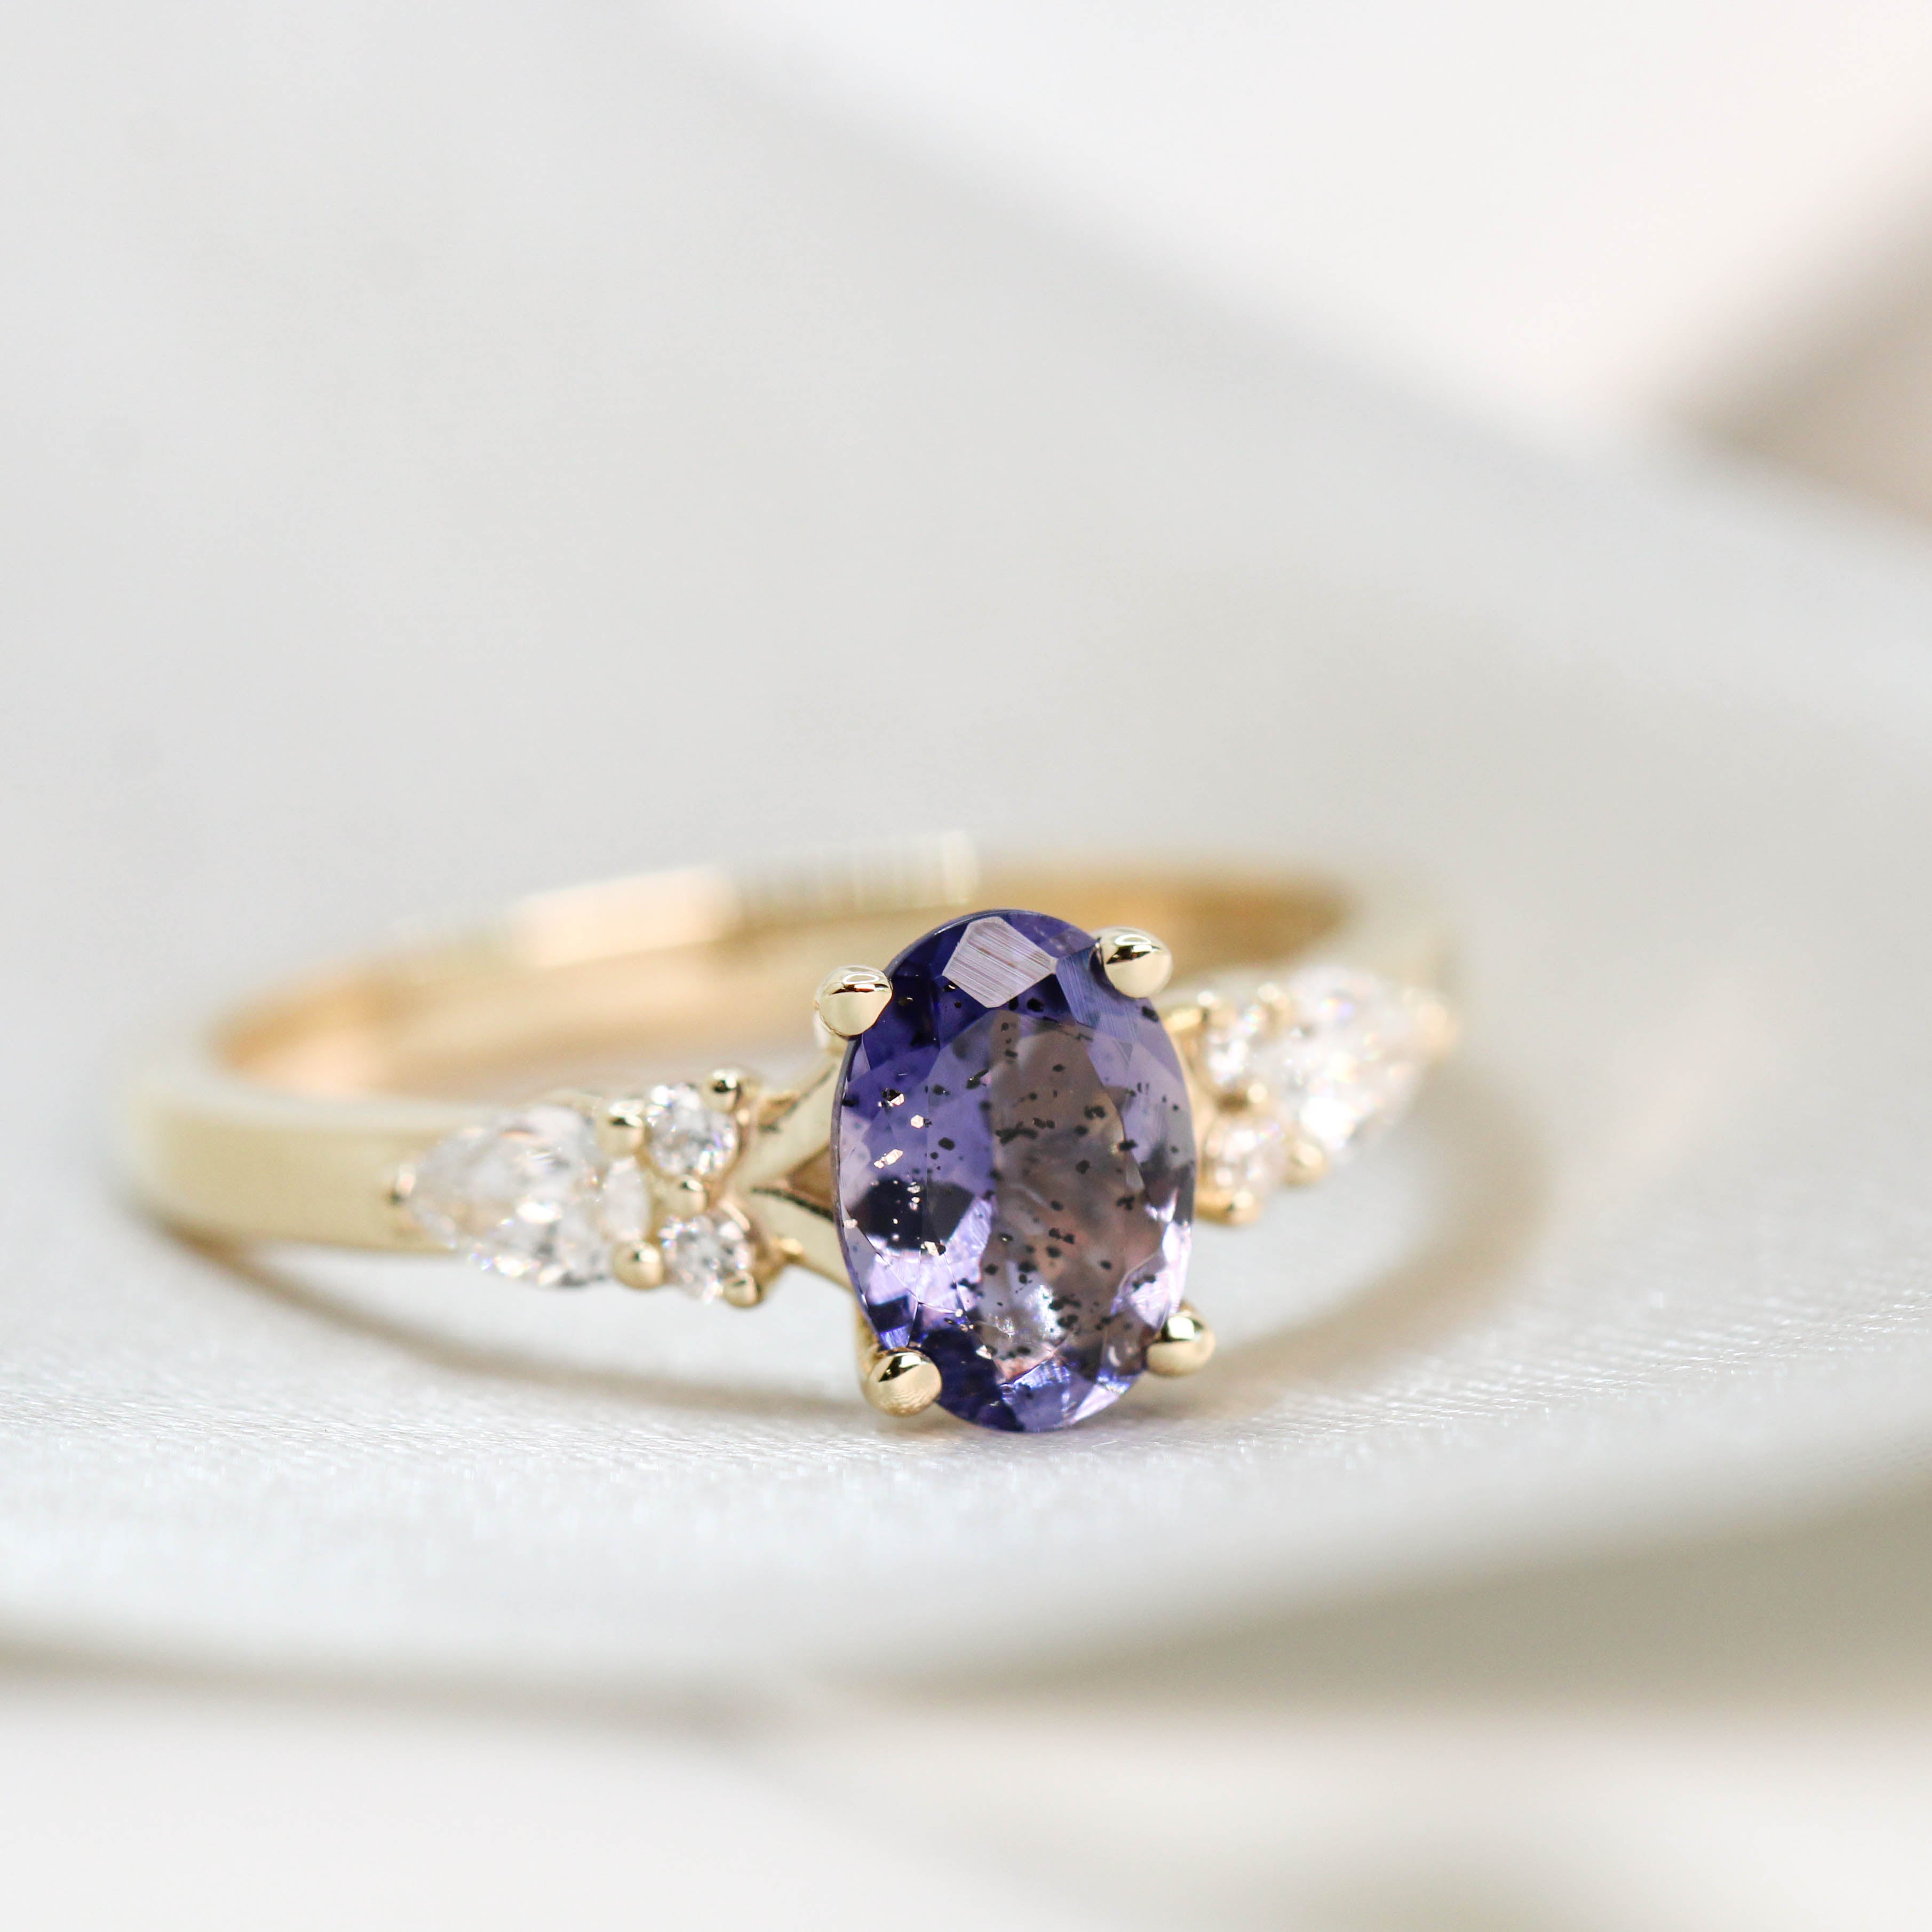 Jenna Ring with a 0.64 Carat Indigo Oval Iolite and White Accent Diamonds in 14k Yellow Gold - Ready to Size and Ship - Midwinter Co. Alternative Bridal Rings and Modern Fine Jewelry